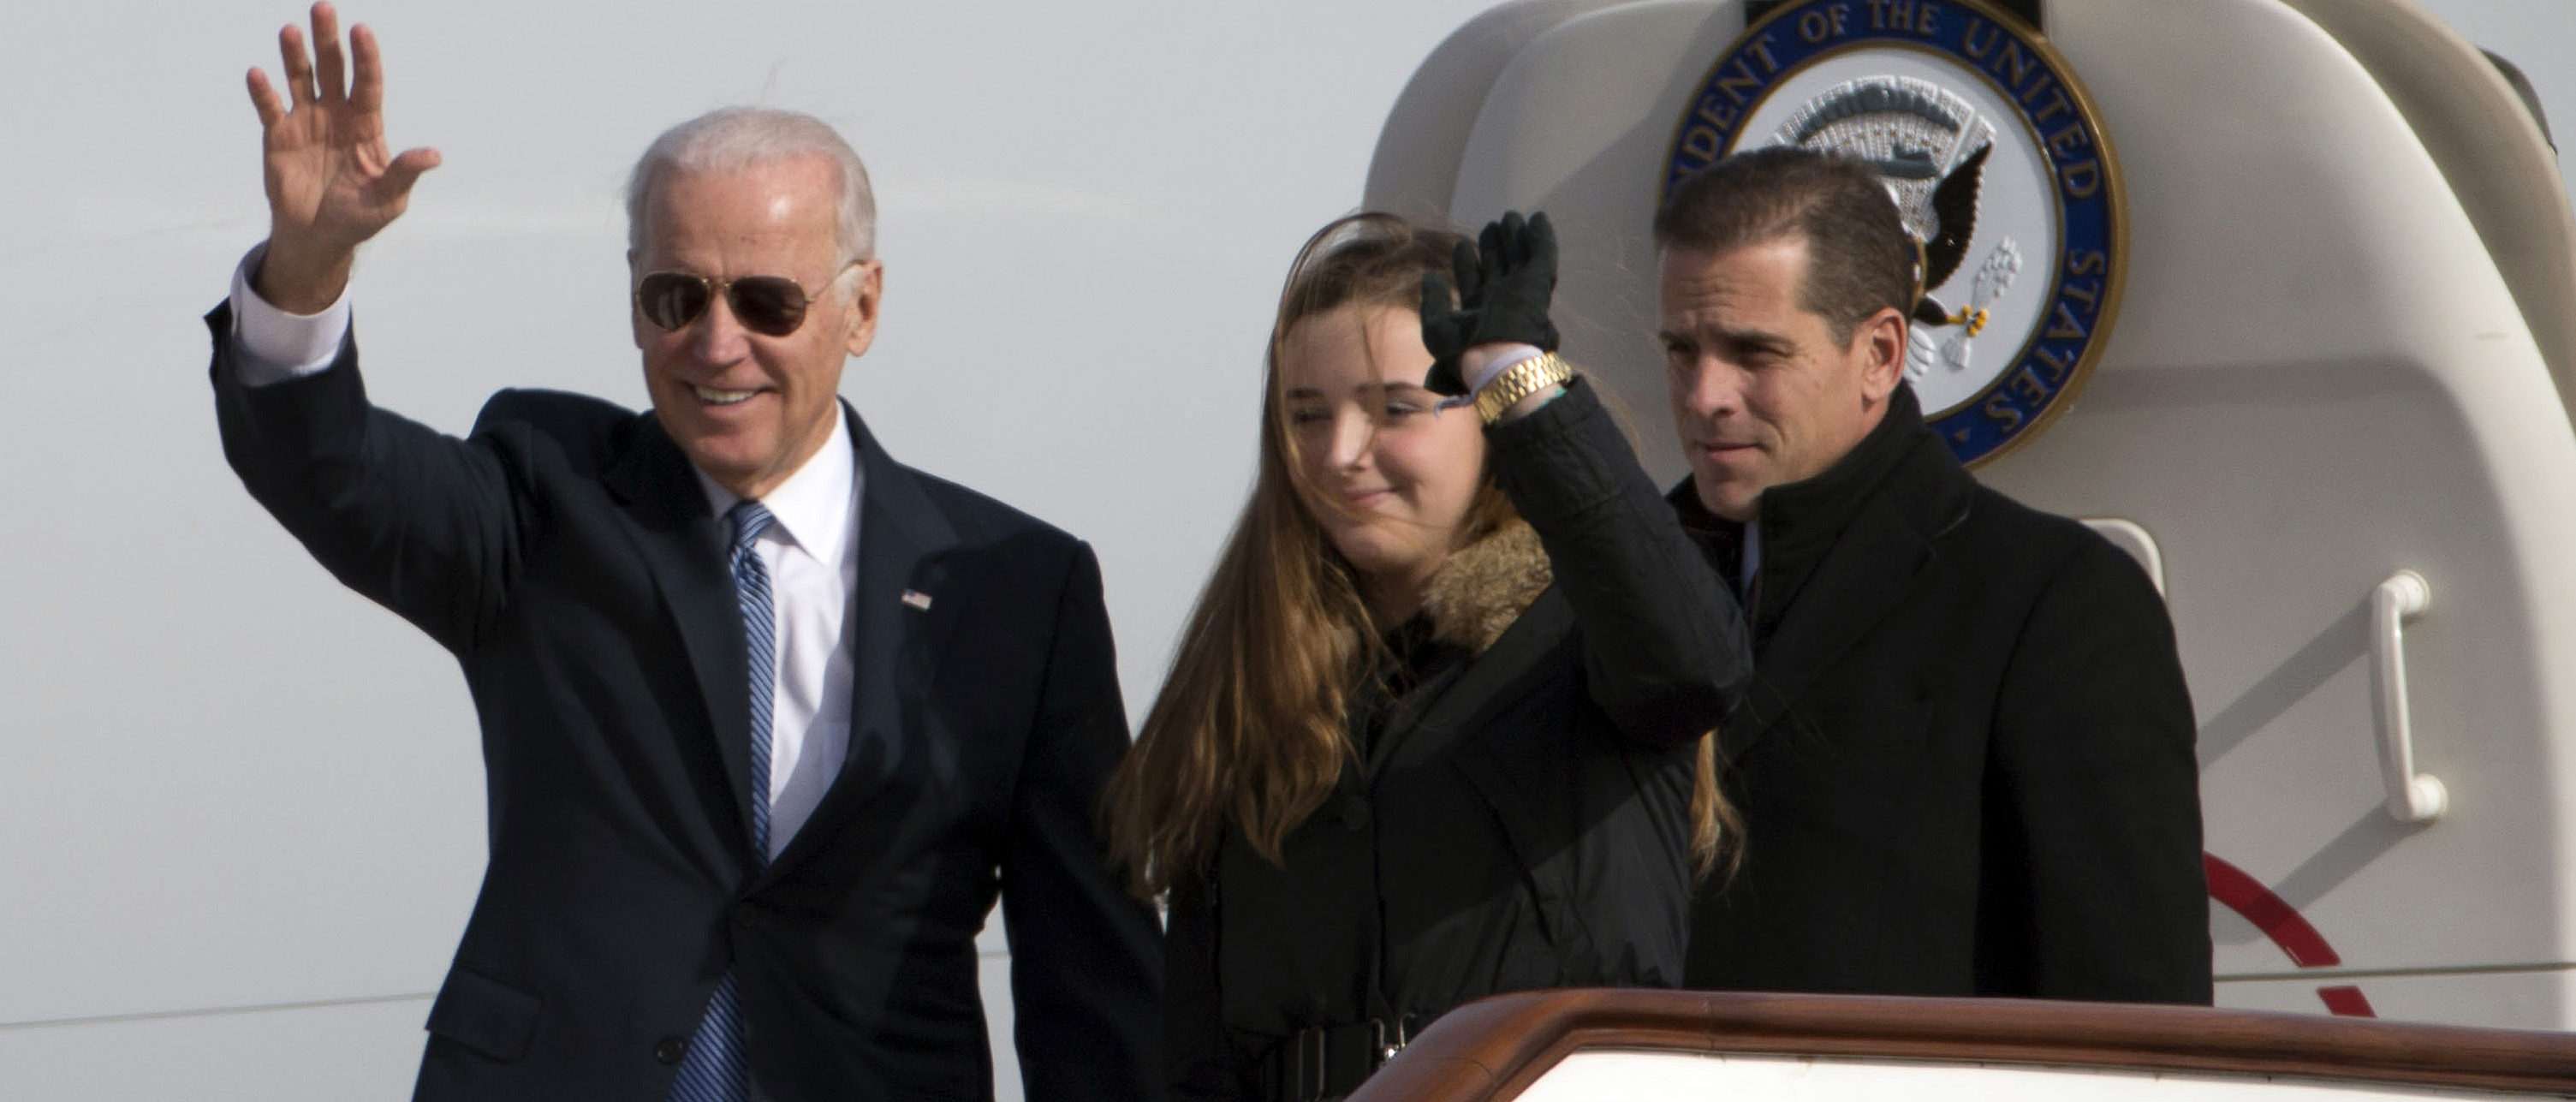 Vice President Joe Biden waves as he walks out of Air Force Two with his granddaughter Finnegan Biden (C) and son Hunter Biden (R) at the airport December 4, 2013 in Beijing, China. Biden is on the first leg of his week-long visit to Asia. (Photo by Ng Han Guan-Pool/Getty Images)